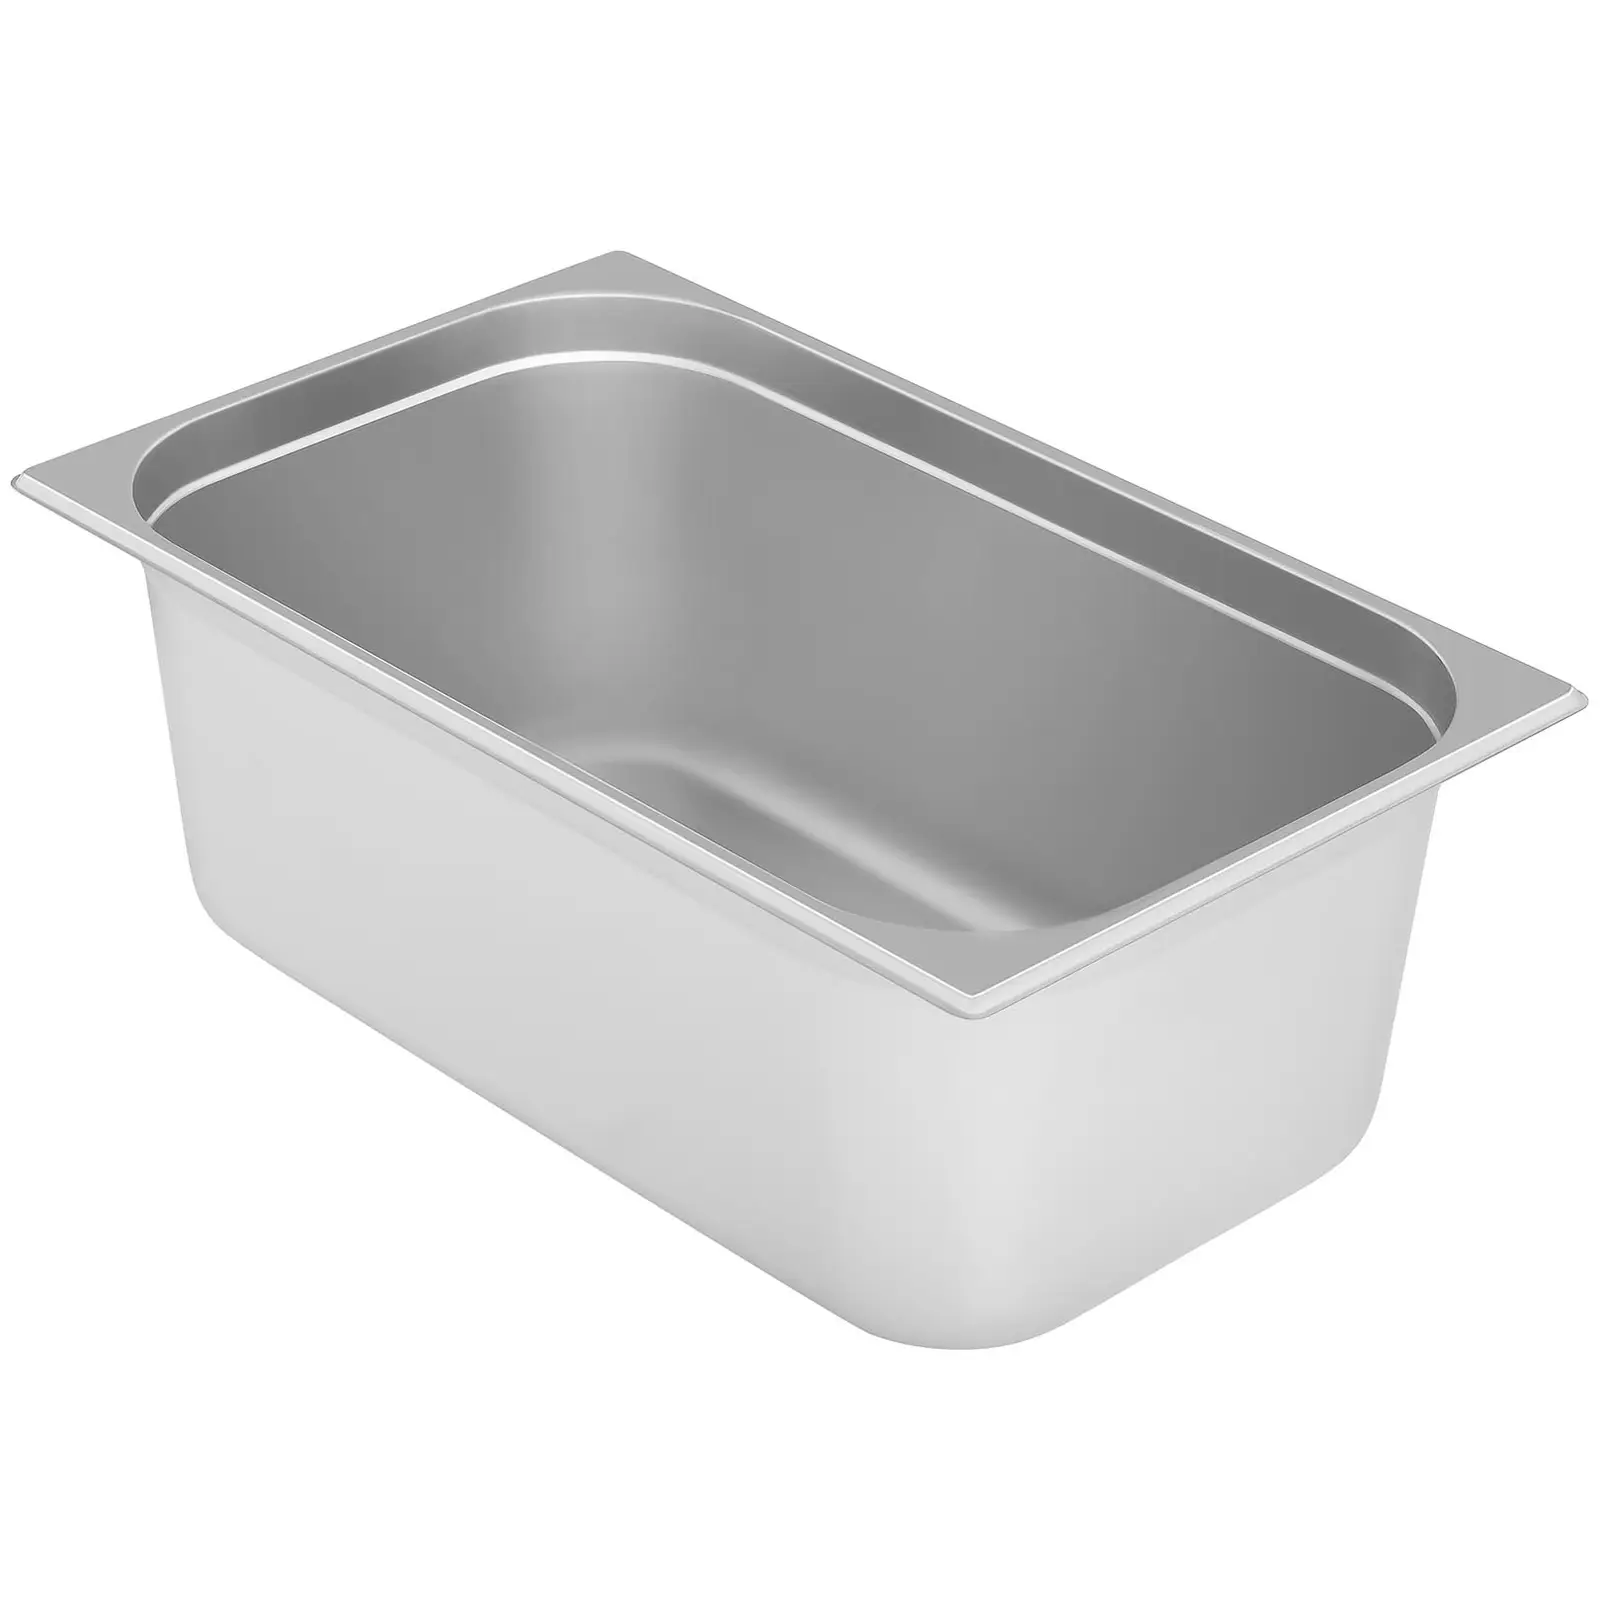 Gastronorm Tray - 1/1 - 200 mm